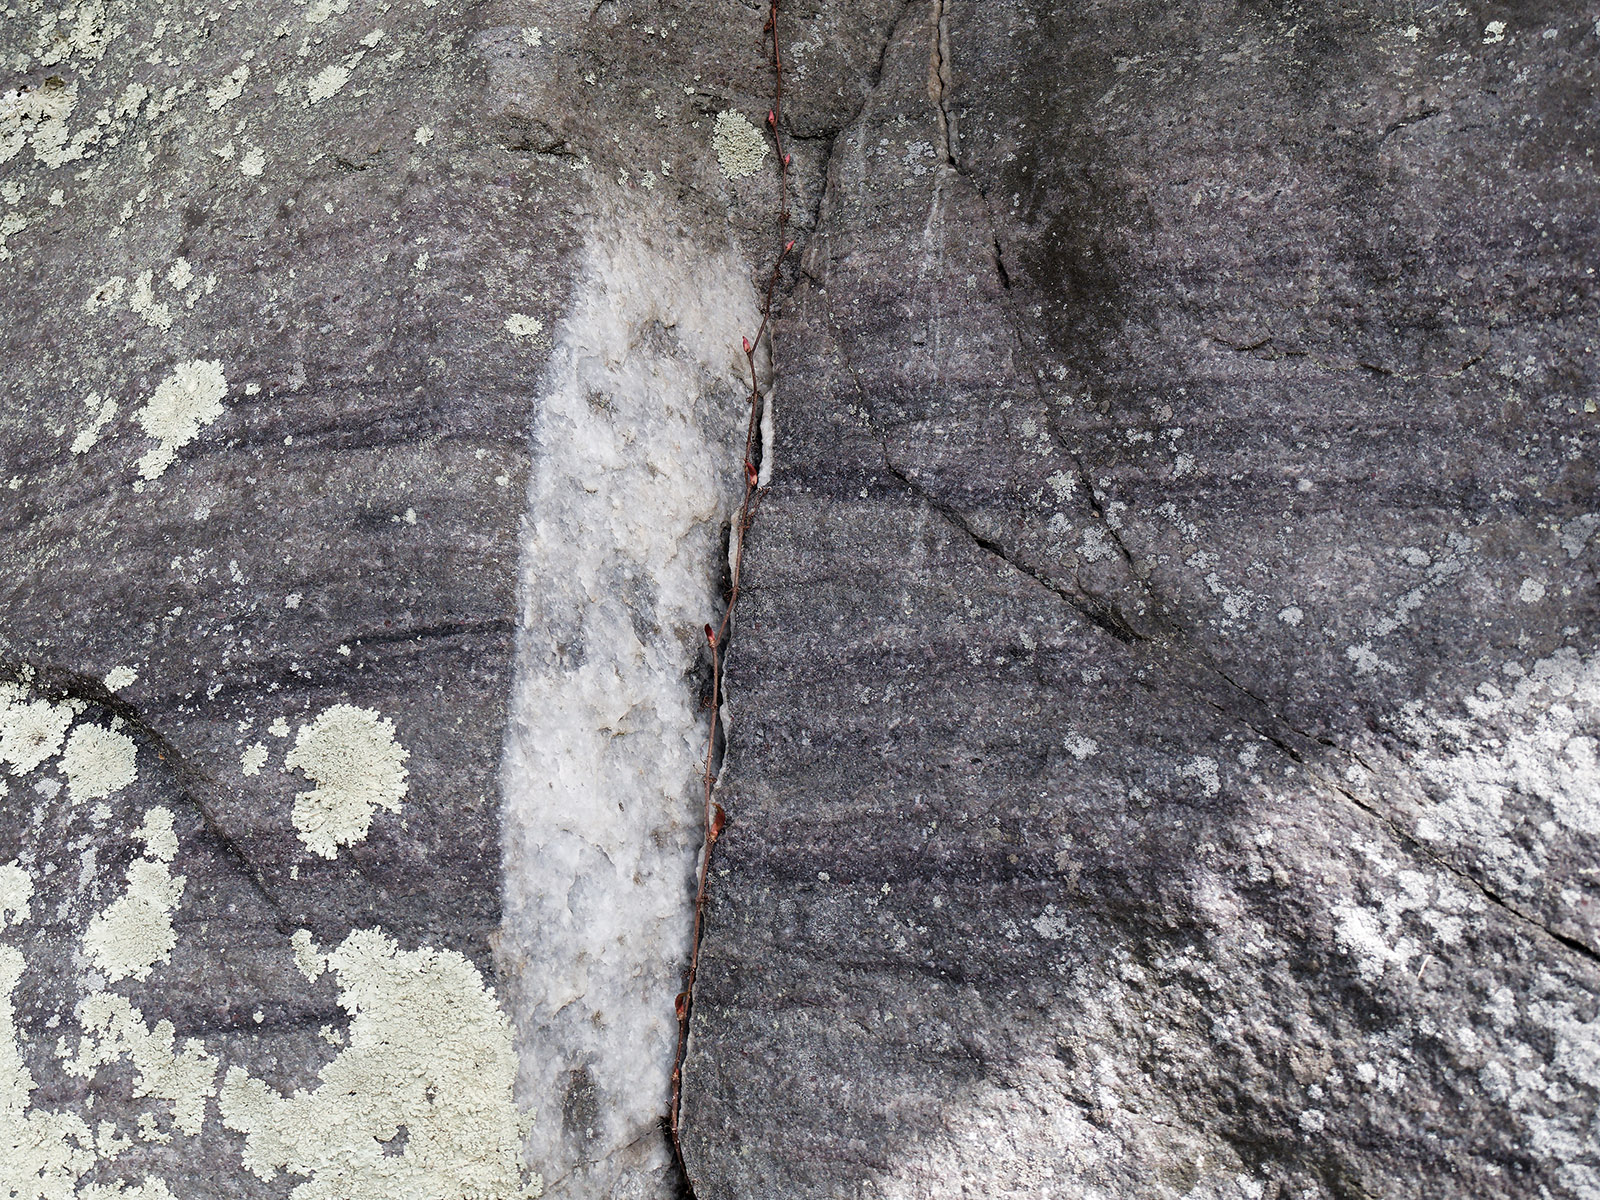 Quartzite showing bedding striations.  Quartz is in fissure area.  Lichen covers the surface in areas.